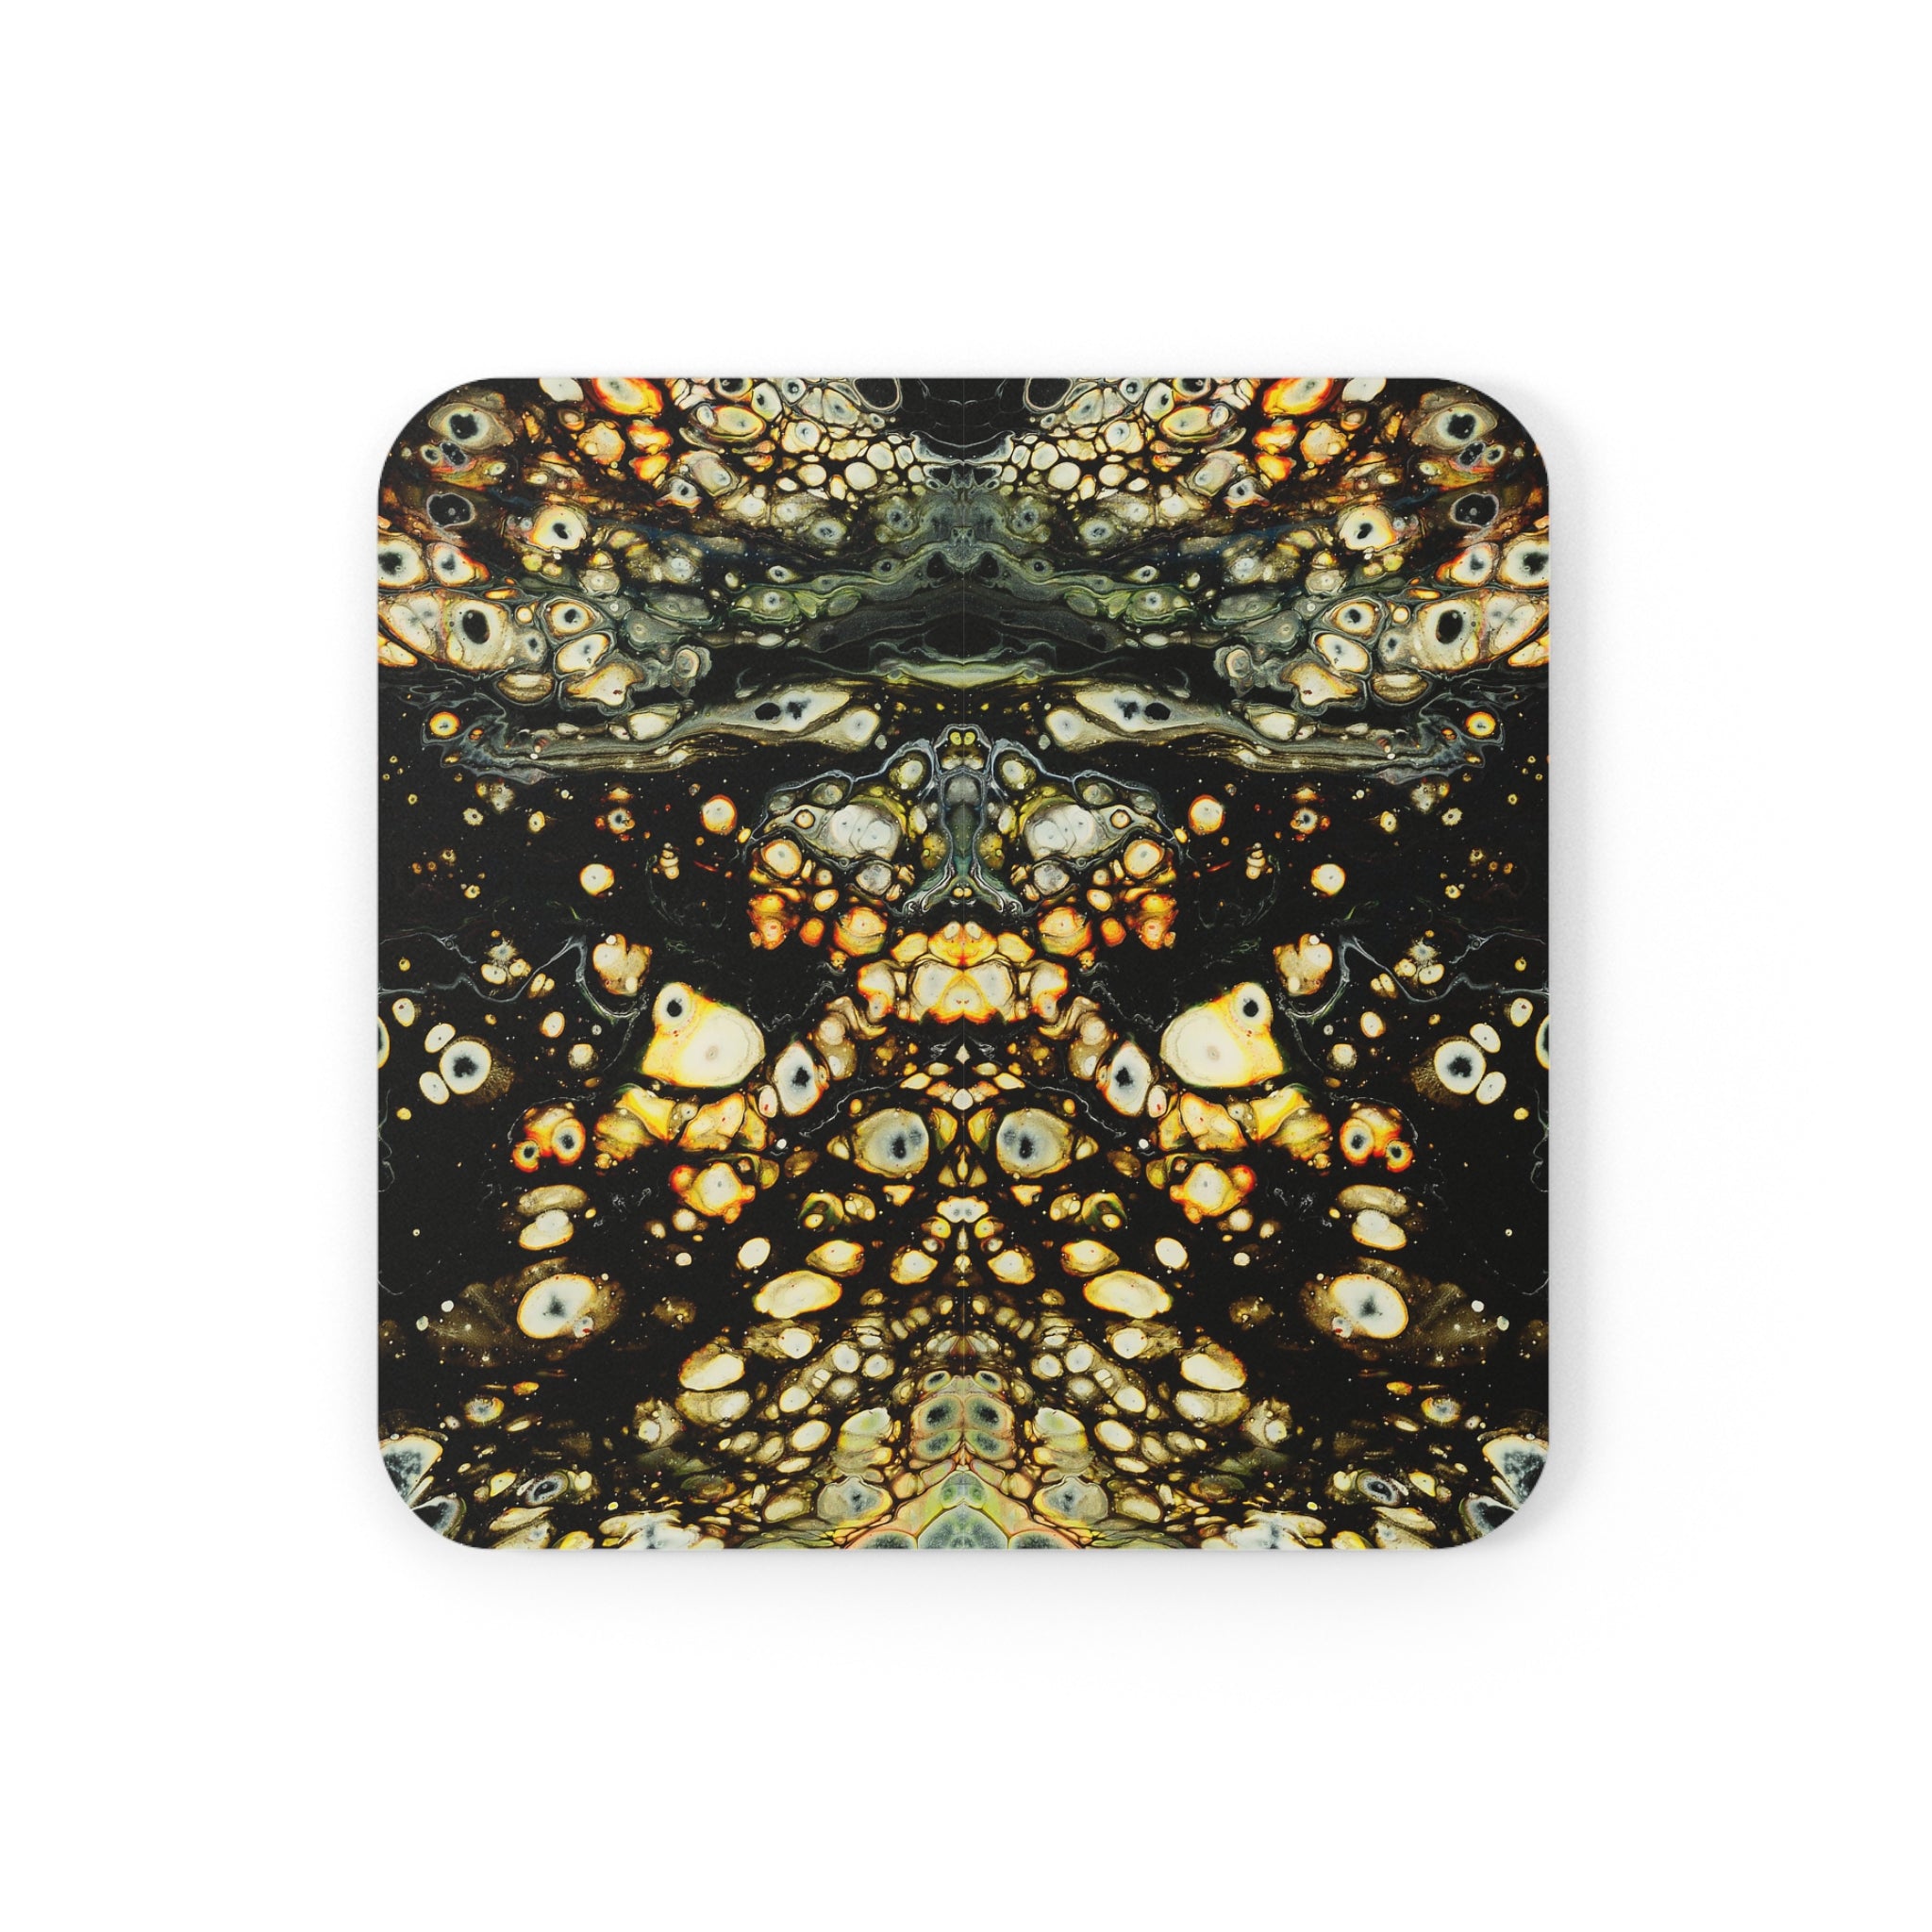 Cameron Creations - Microbial Pool - Stylish Coffee Coaster - Square Front